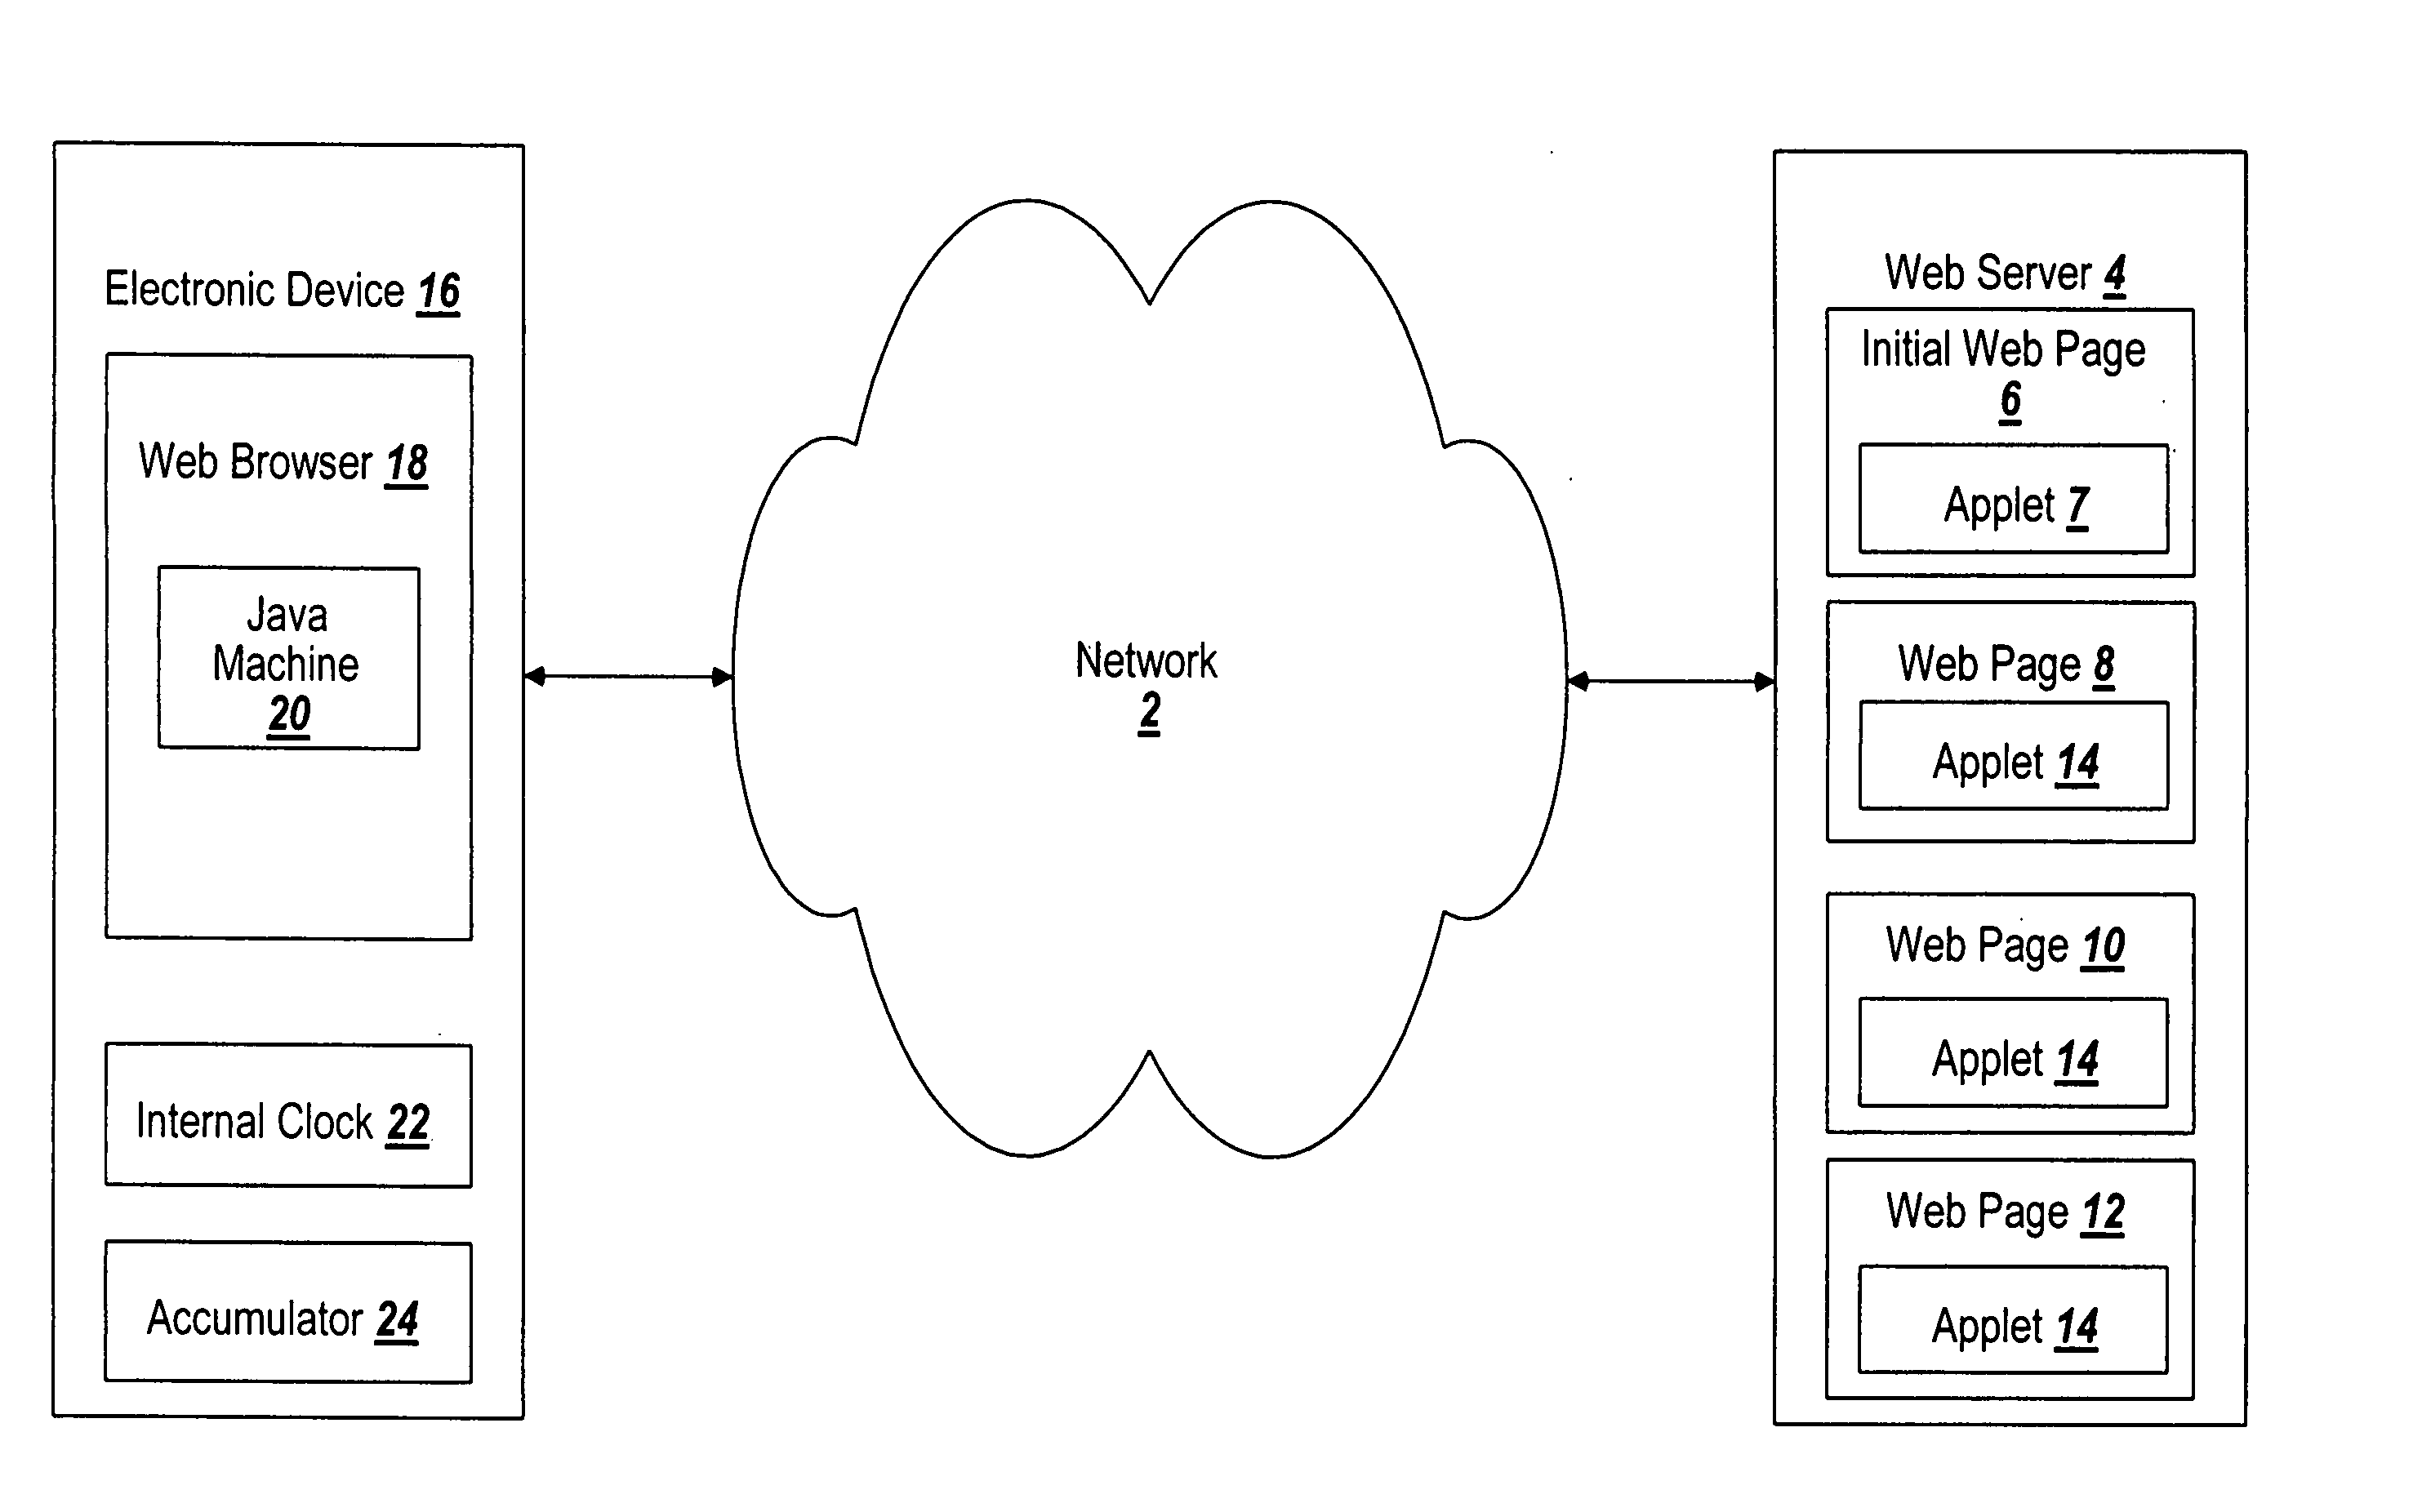 System and method for providing educational content over a network